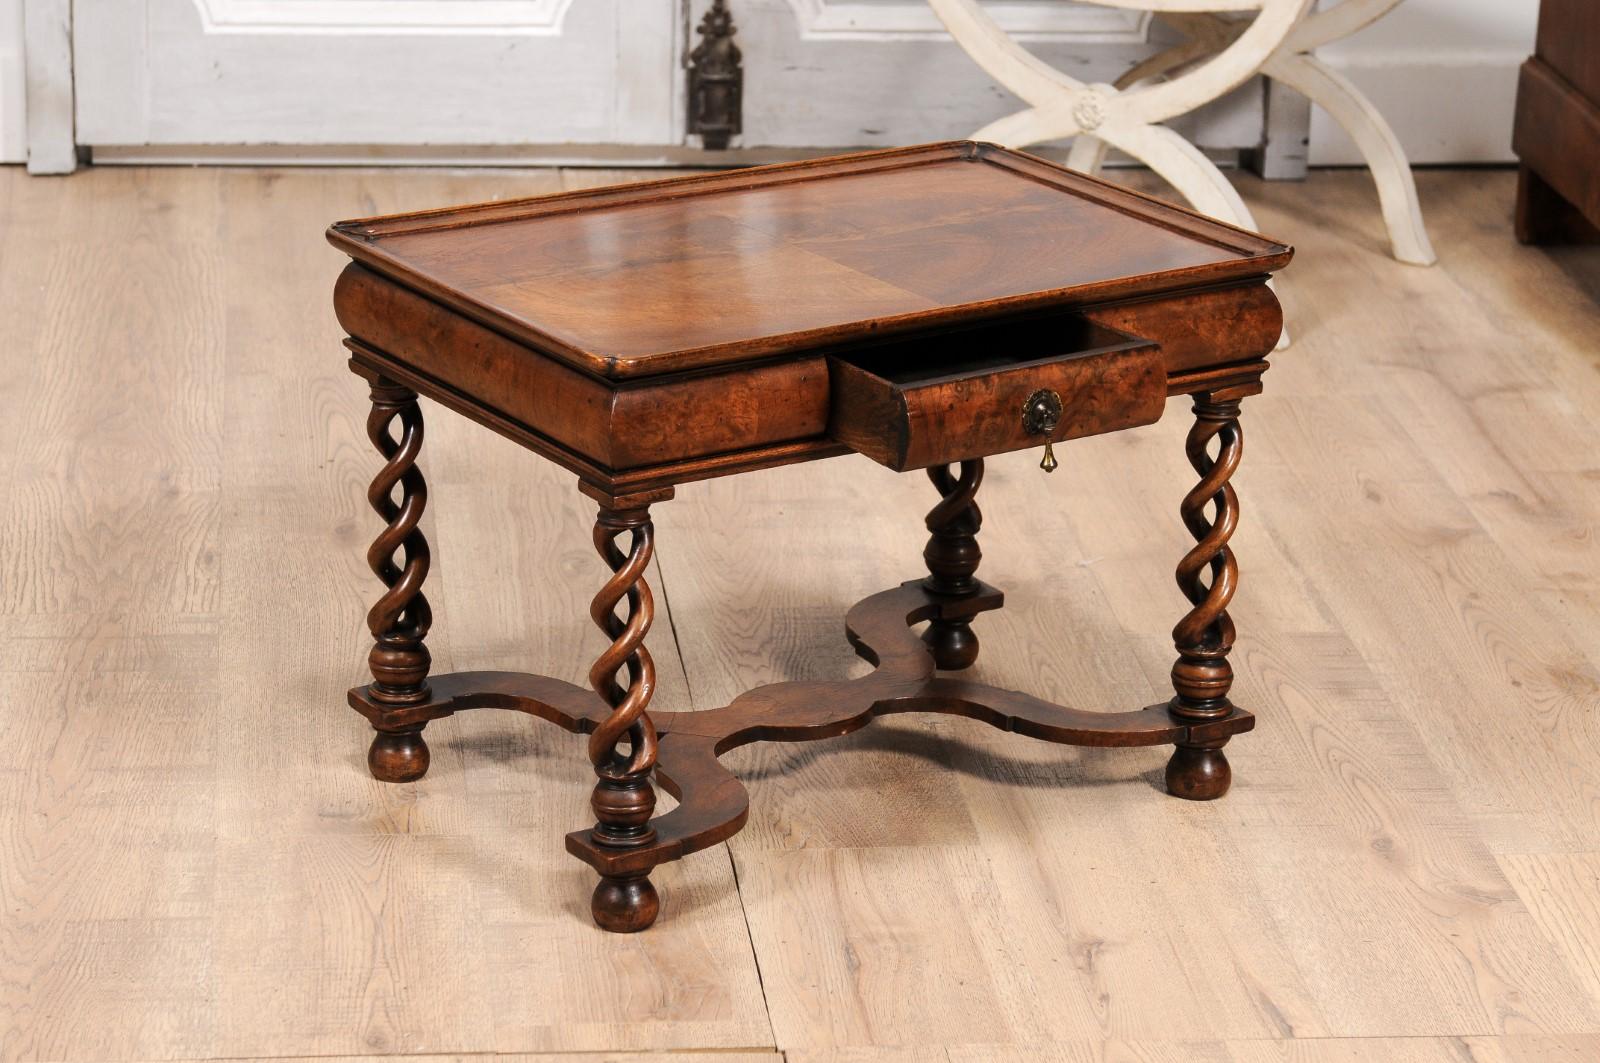 English Queen Anne Style 1910 Burl Walnut Coffee Table with Bookmatched Tray Top In Good Condition For Sale In Atlanta, GA